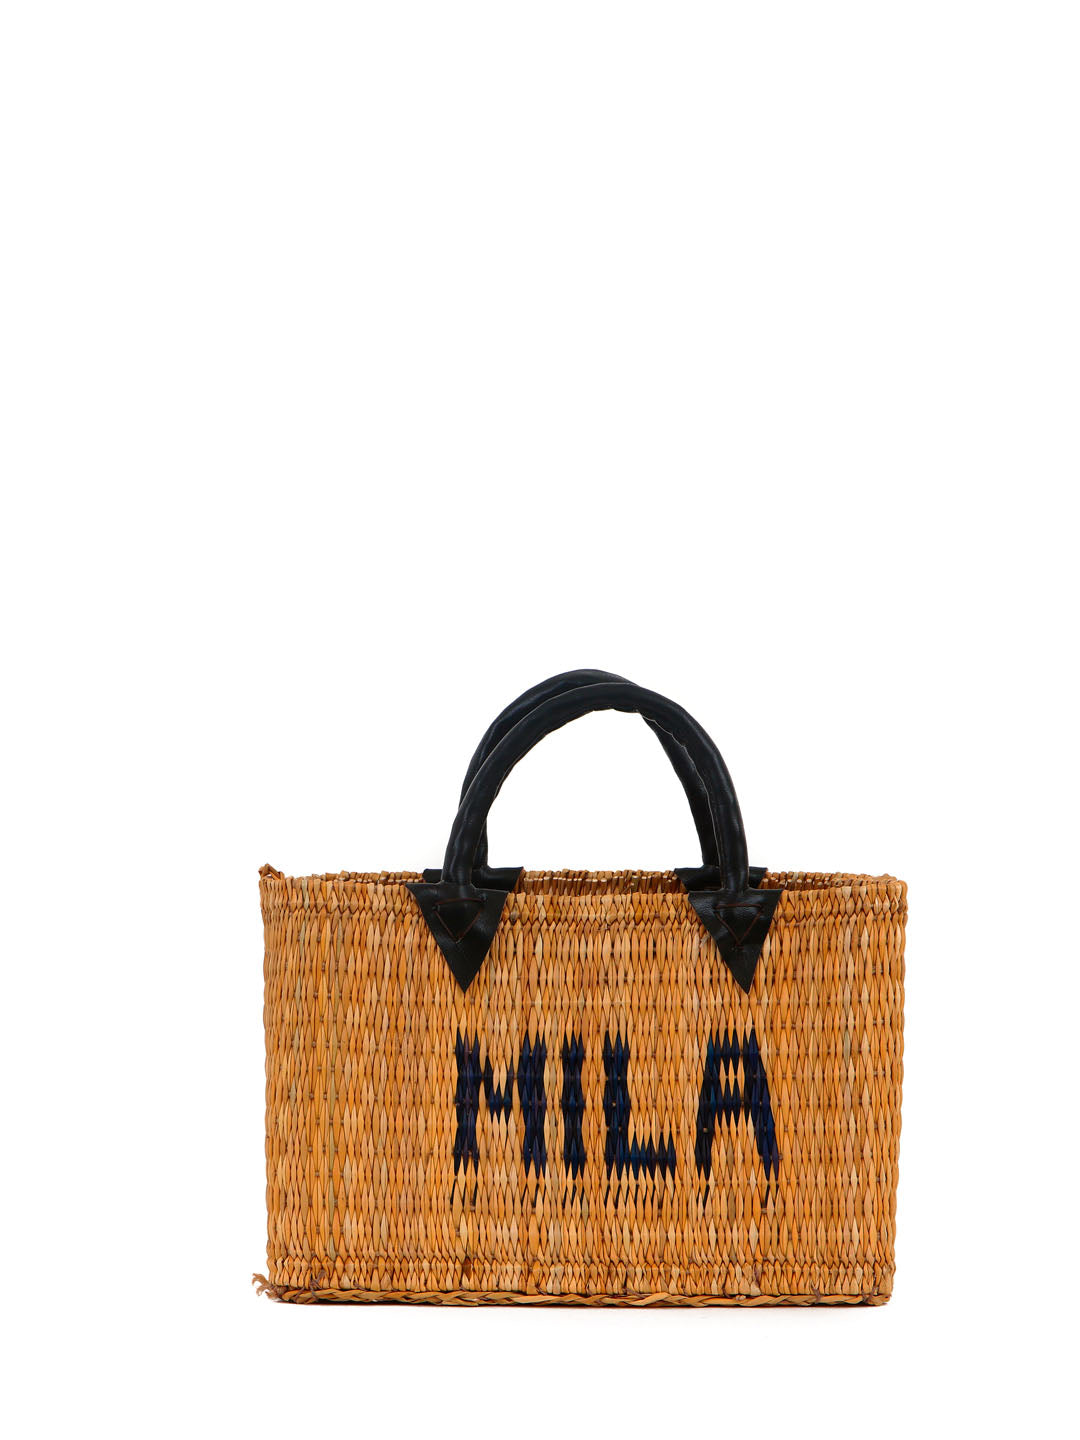 Bags, Handmade bags from local artisans